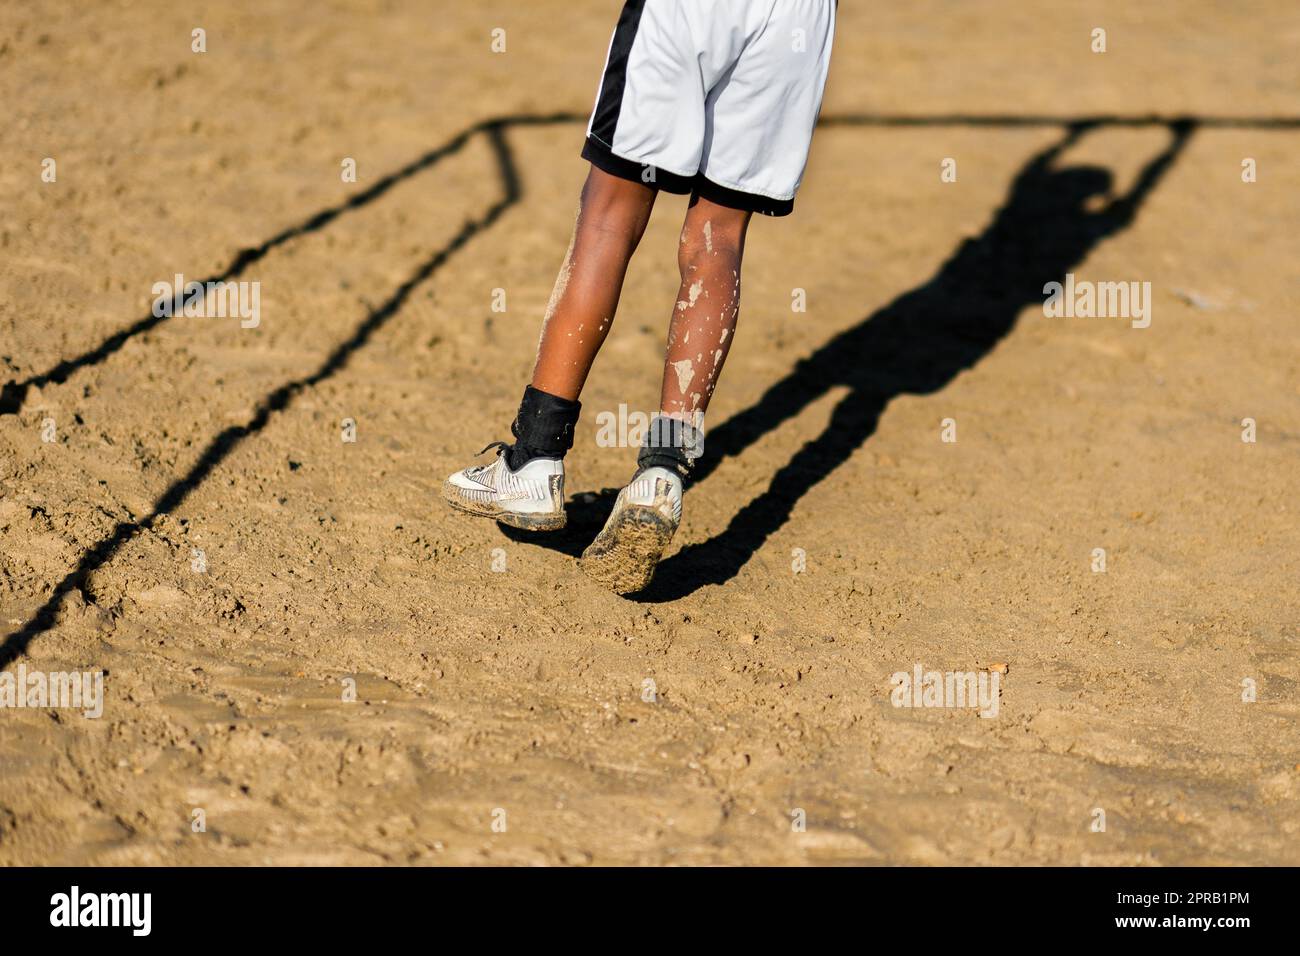 A young Afro-Colombian football player swings on the crossbar of a goal during a training session in Necoclí, Antioquia, Colombia. Stock Photo